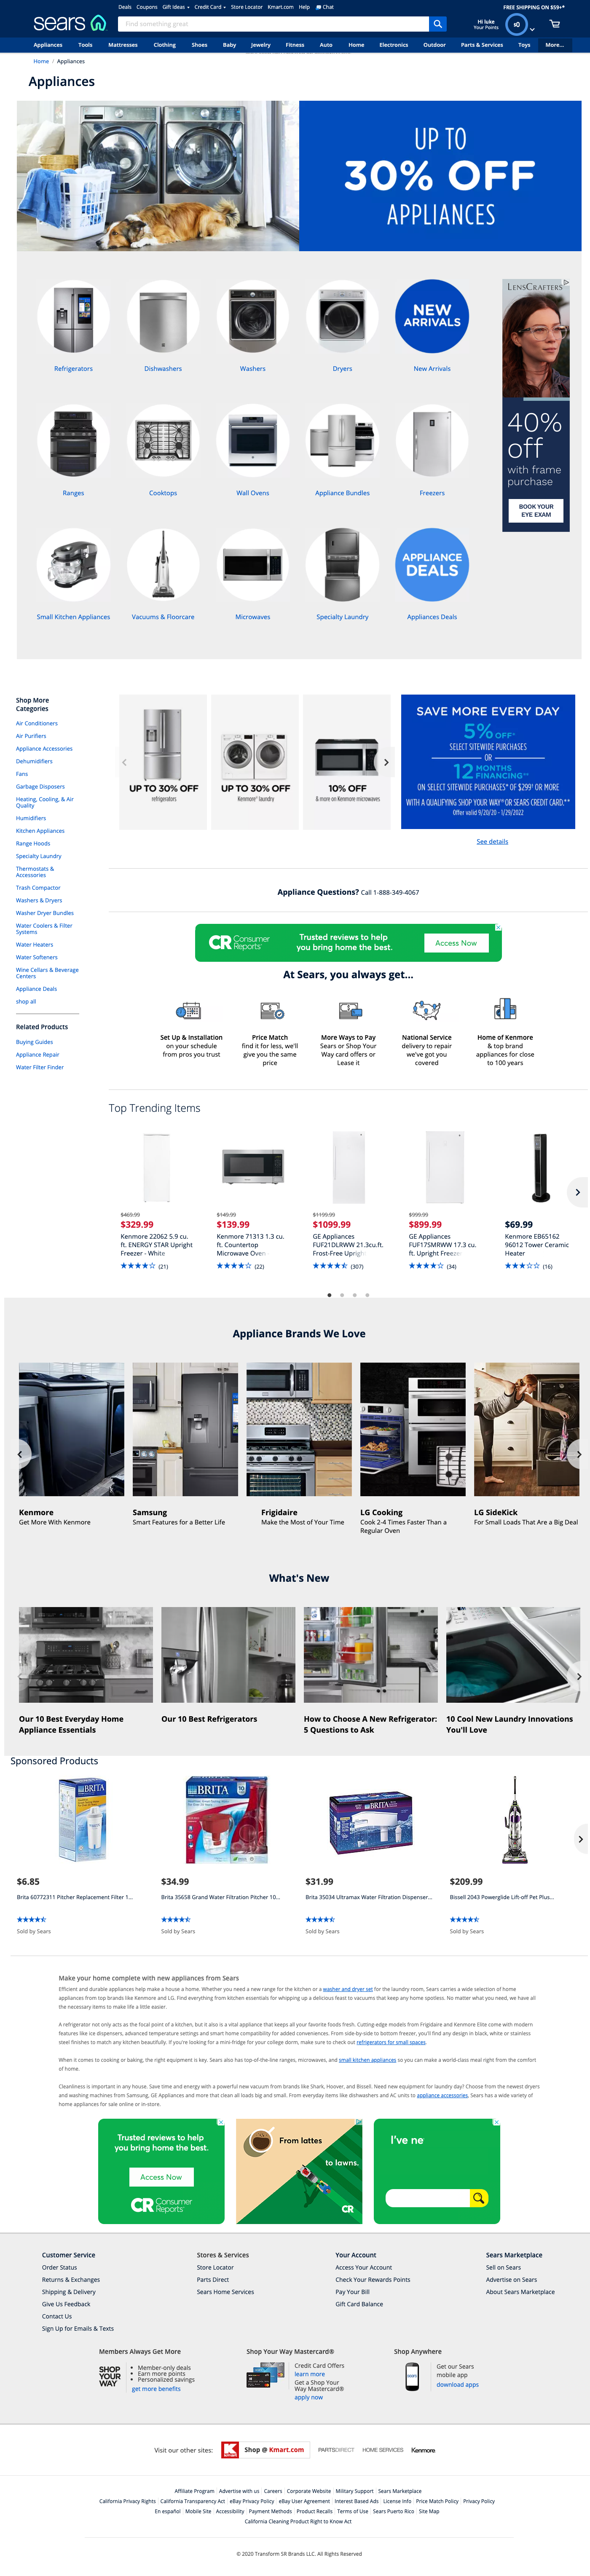 This is an example of the Appliances Page built with Adobe Experience Manager